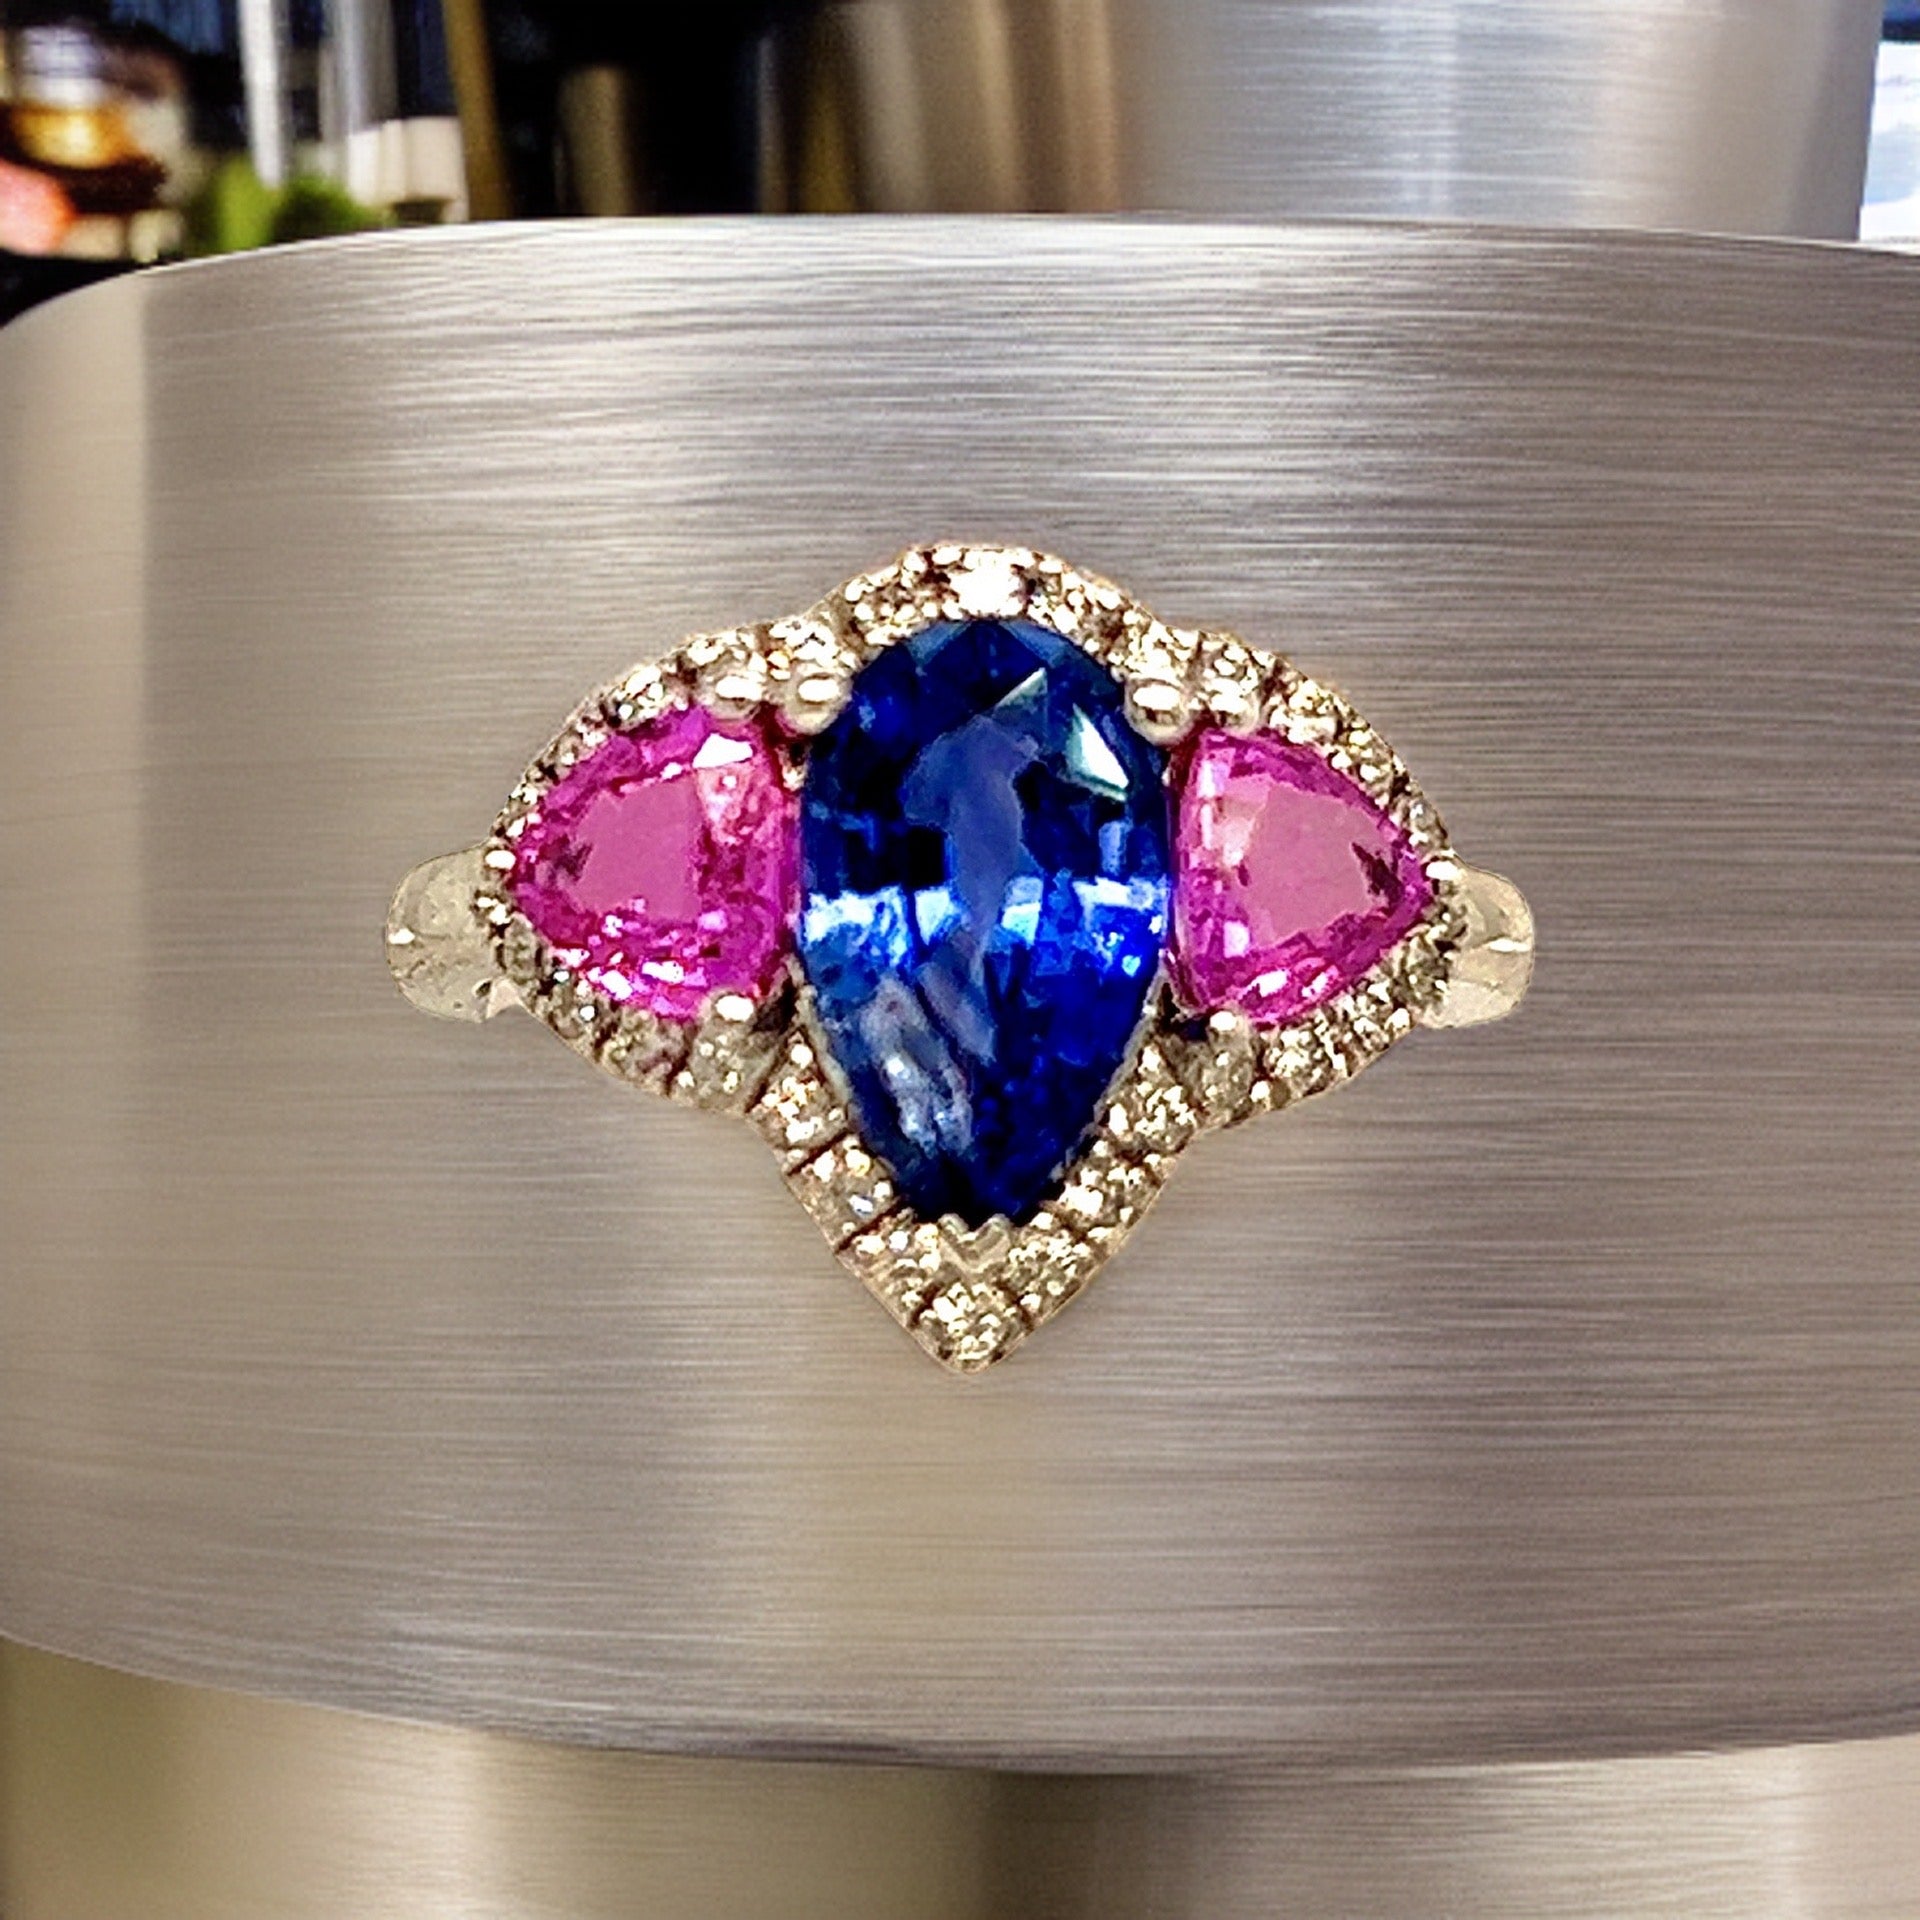 Natural Sapphire Diamond Ring Size 6.5 14k Gold 3.43 TCW Certified $7,950 215419 - Certified Fine Jewelry